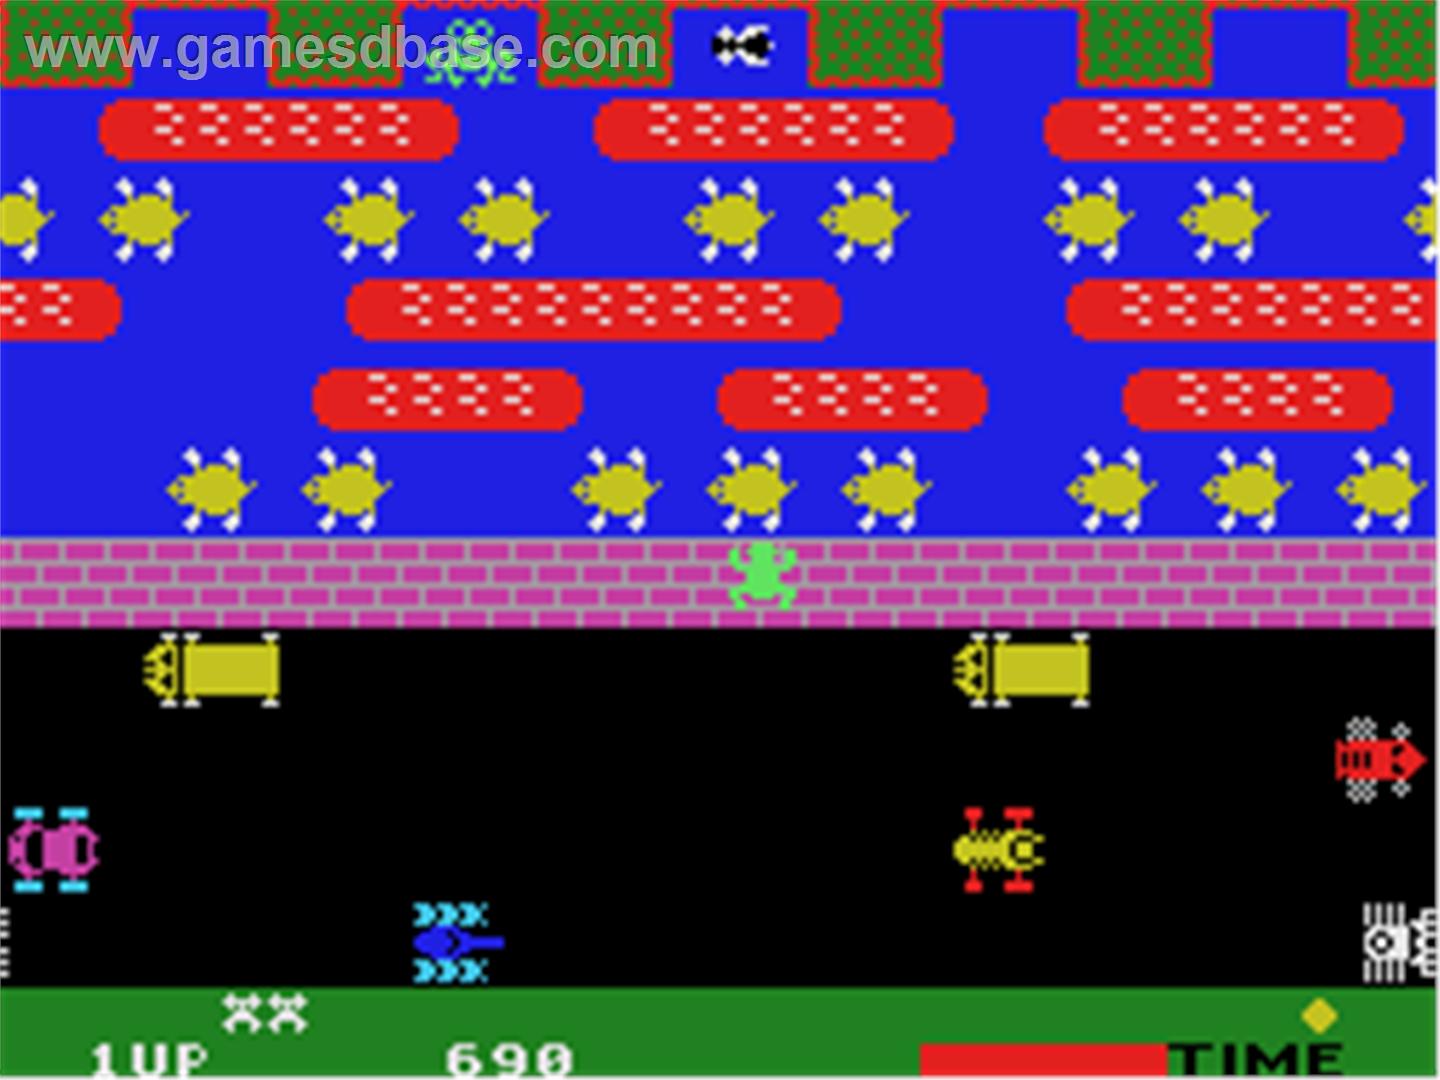 1440x1080 > Frogger Wallpapers